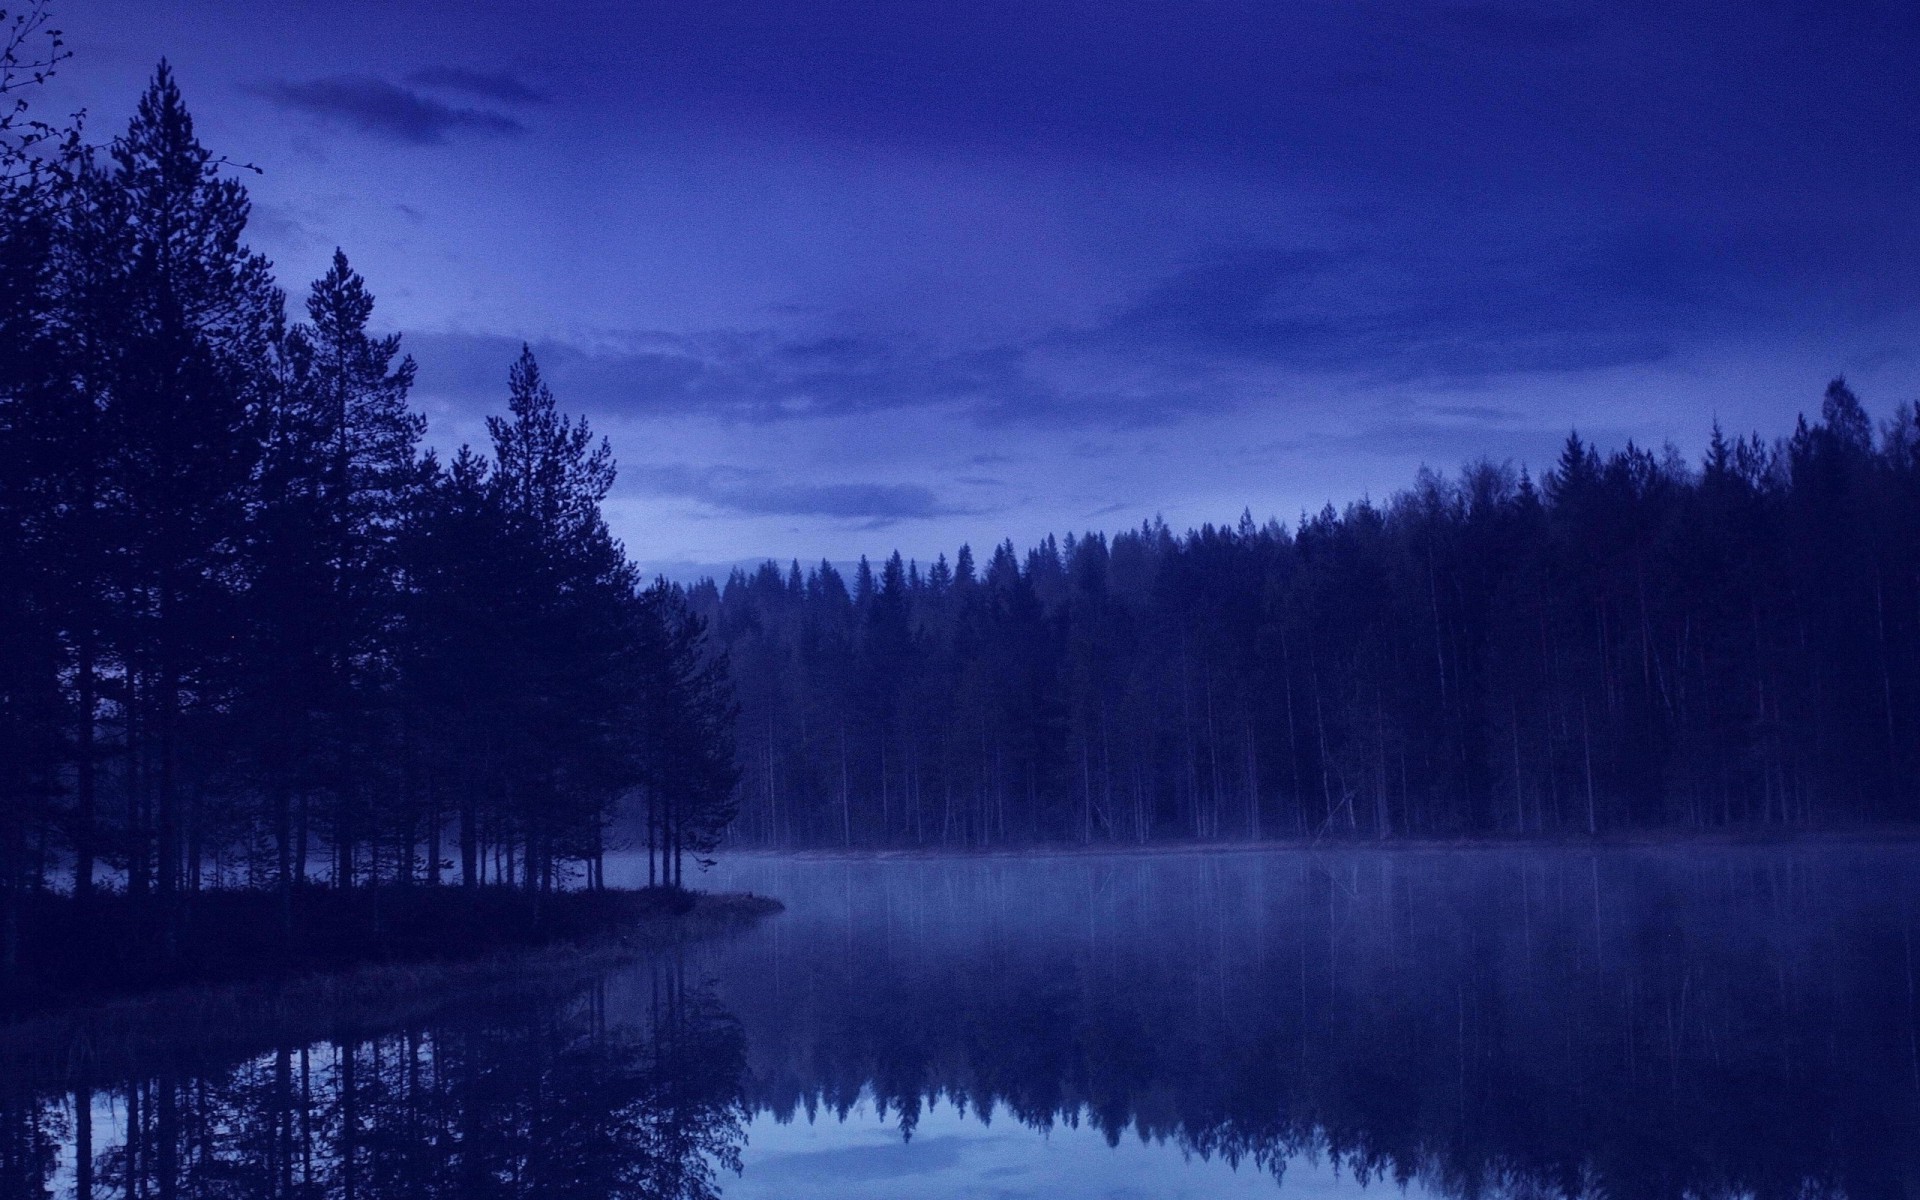 nature, Landscape, Blue, Evening, Reflection, Water, Forest, Trees, Pine Trees, Calm, Island Wallpaper